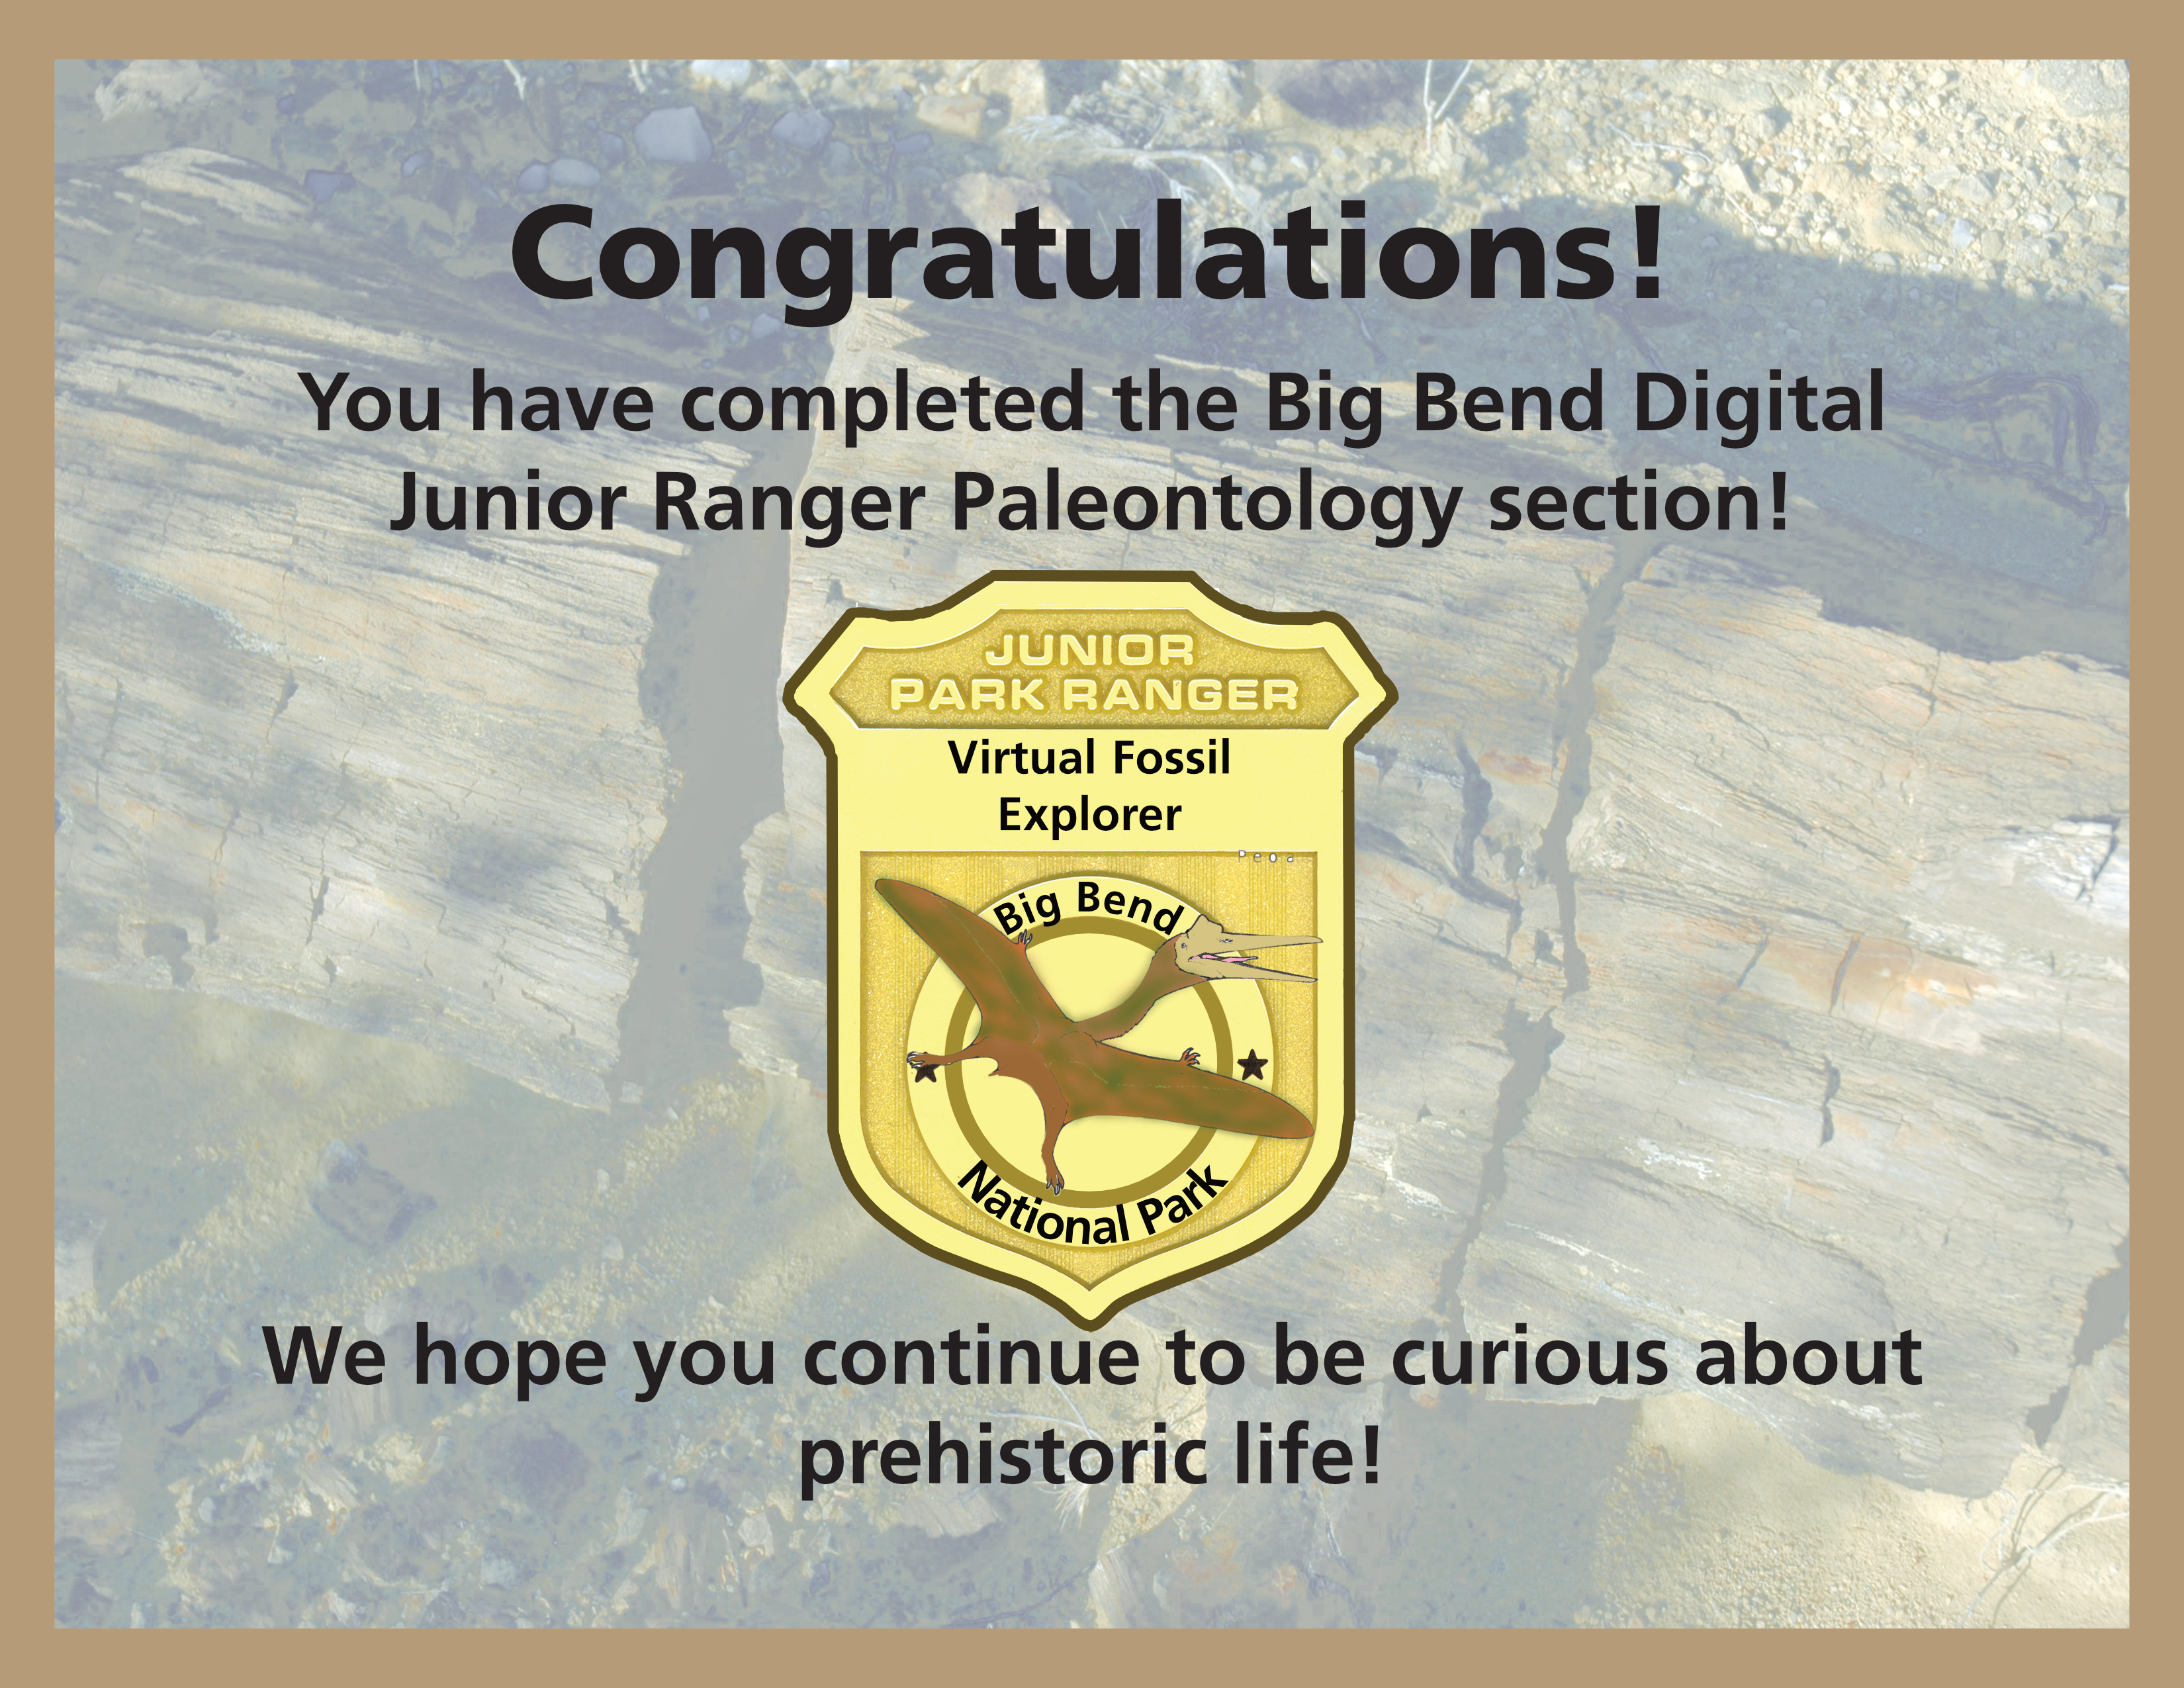 A certificate of completion with a junior ranger badge in the middle. The background shows a picture of a petrified wood, and the badge has a drawing of a flying dinosaur in the center.